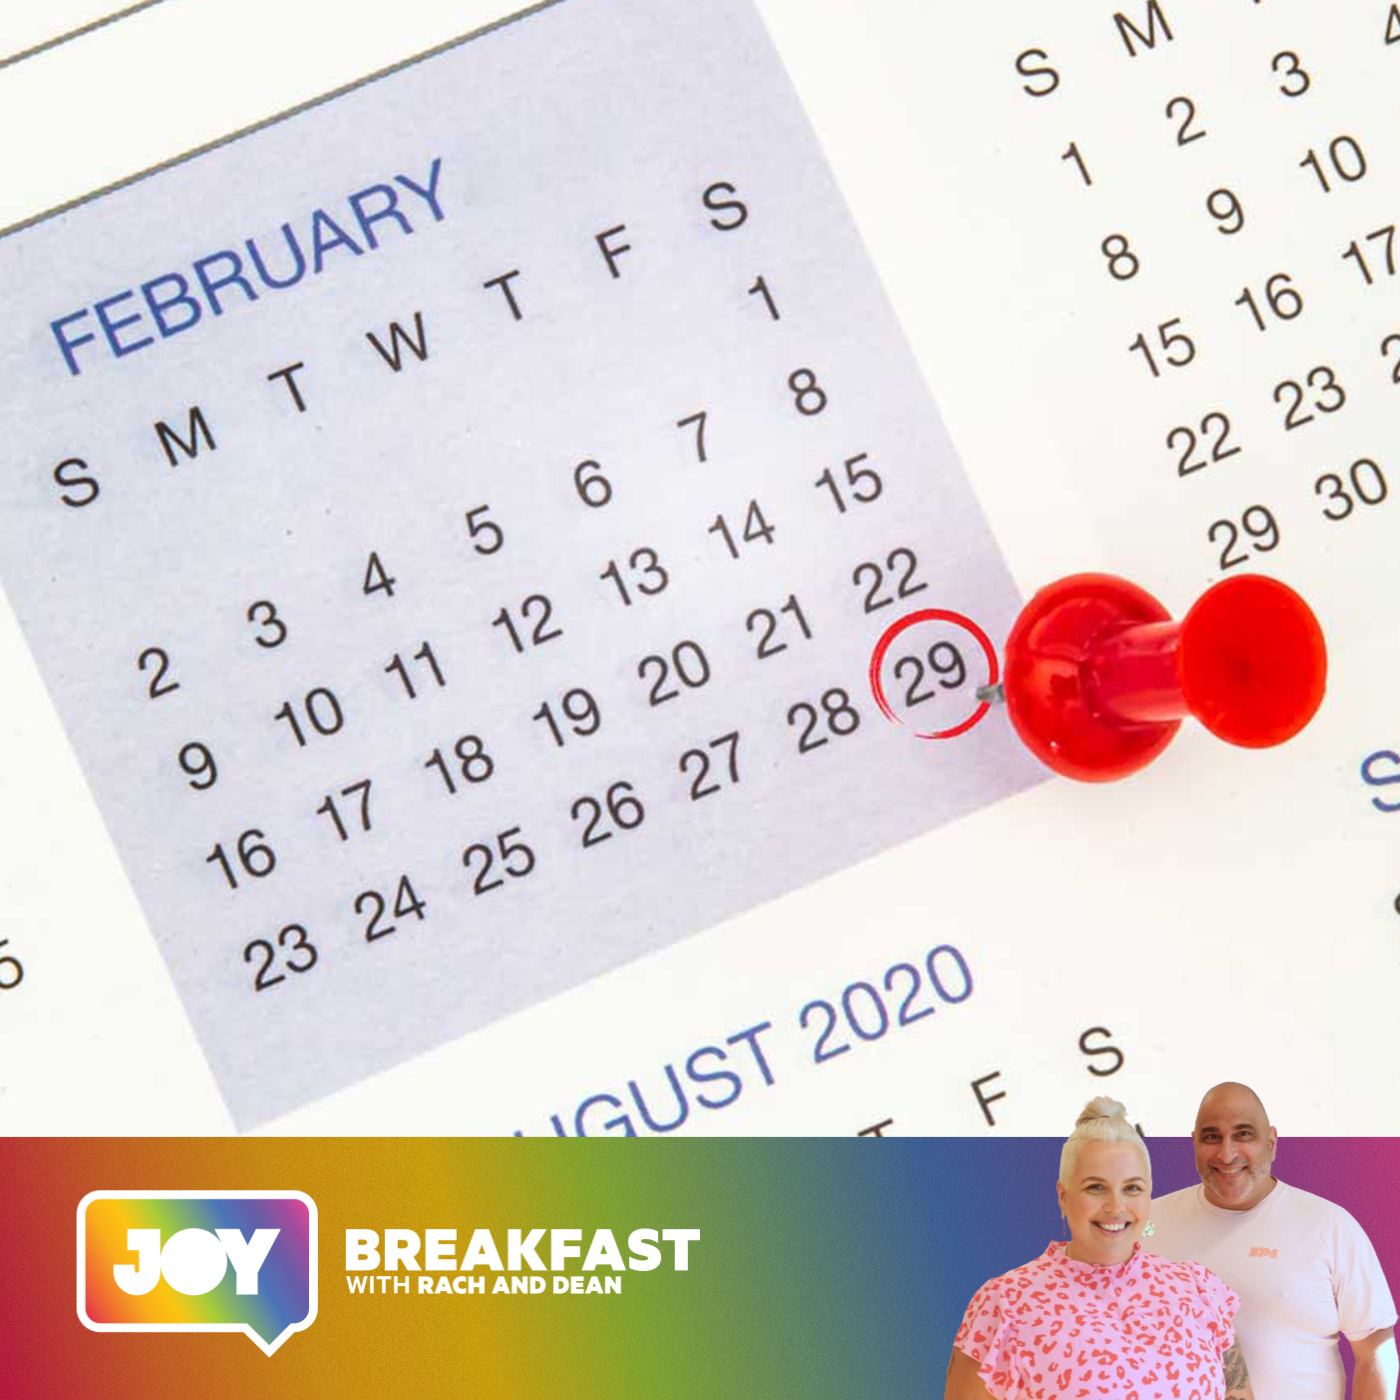 What are you doing for the 13th month this Leap Year?